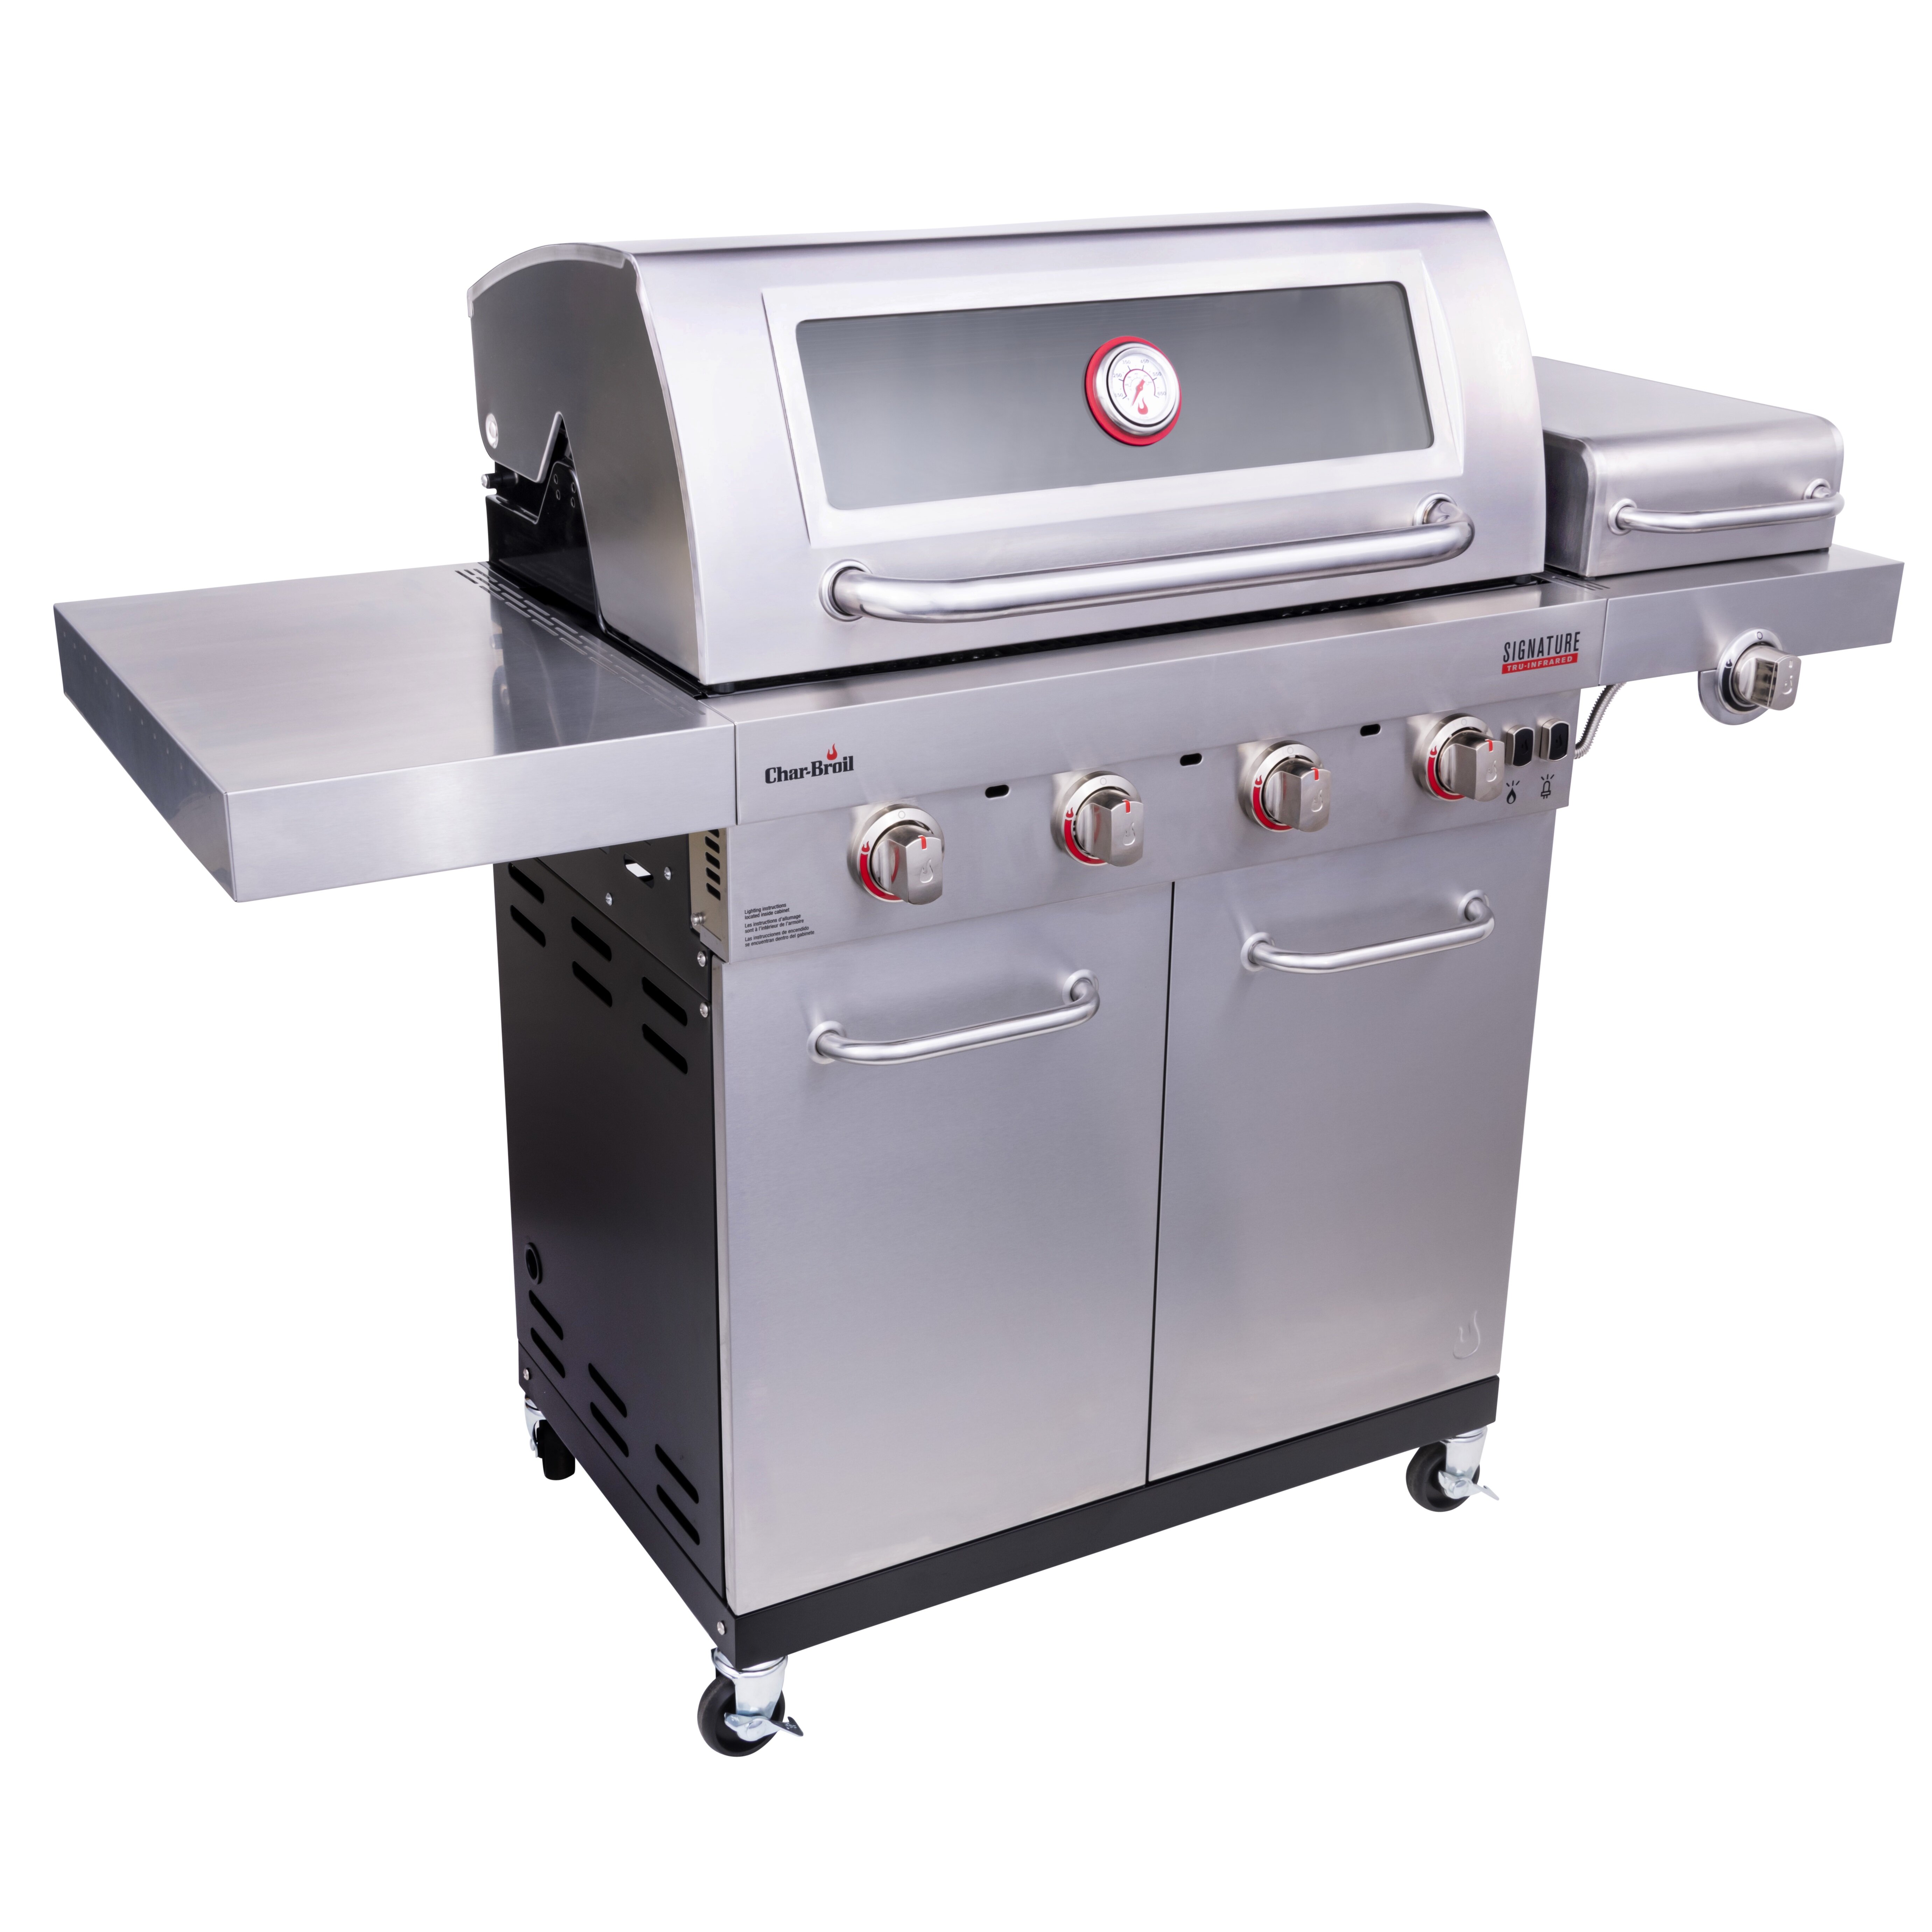 CharBroil Char-Broil 4 - Burner Free Standing Liquid Propane Infrared 45000  BTU Gas Grill with Side Burner and Cabinet & Reviews | Wayfair